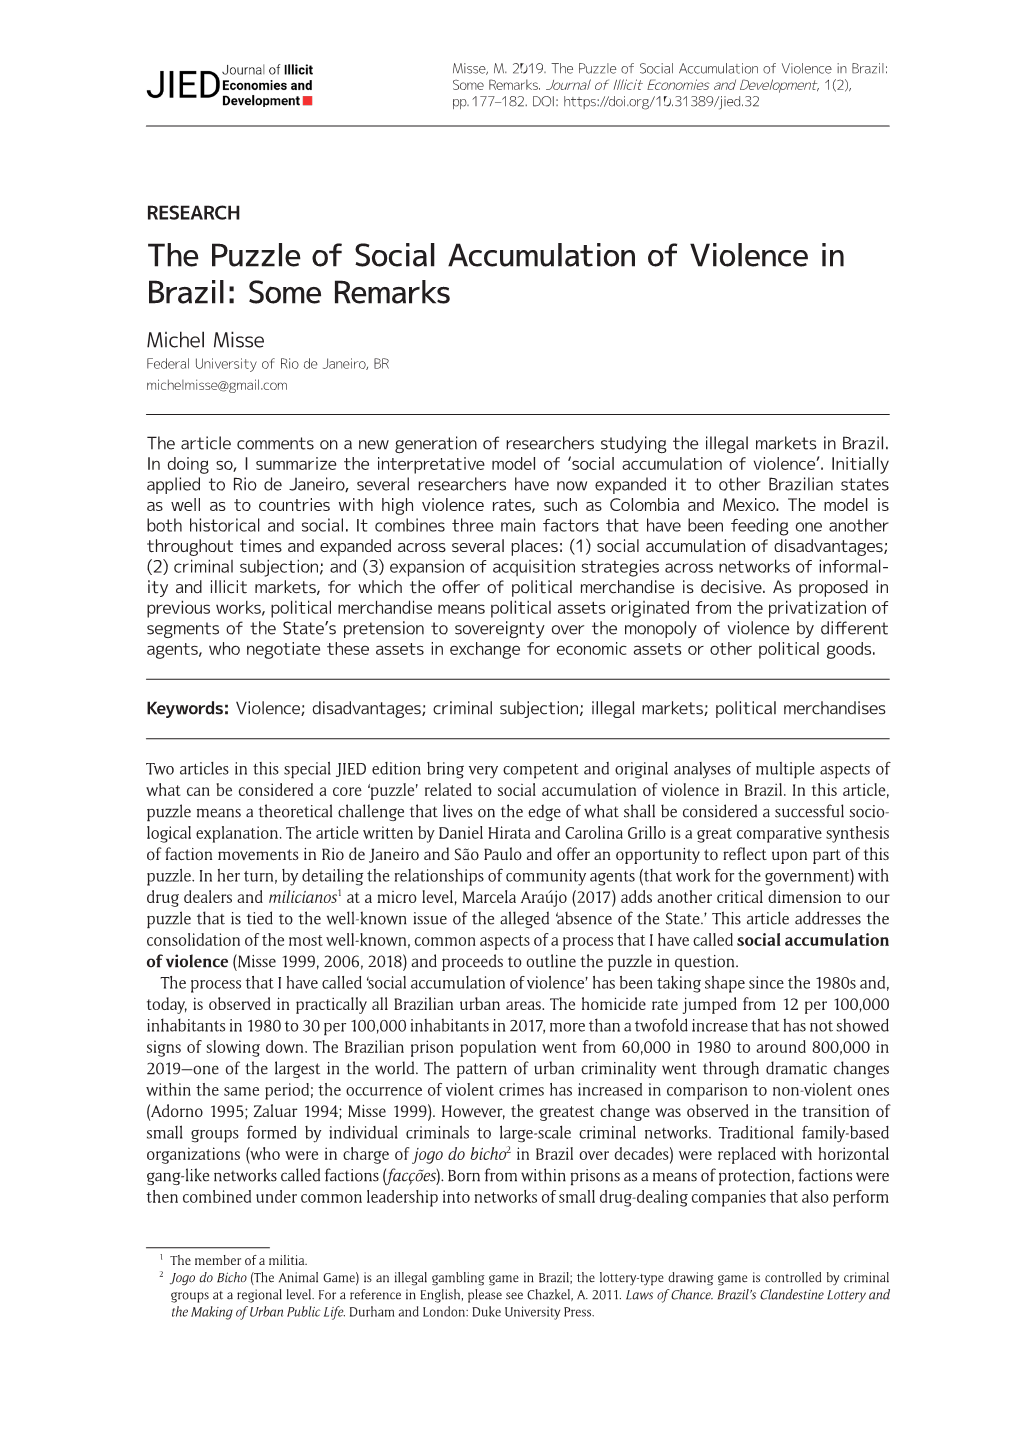 The Puzzle of Social Accumulation of Violence in Brazil: Some Remarks